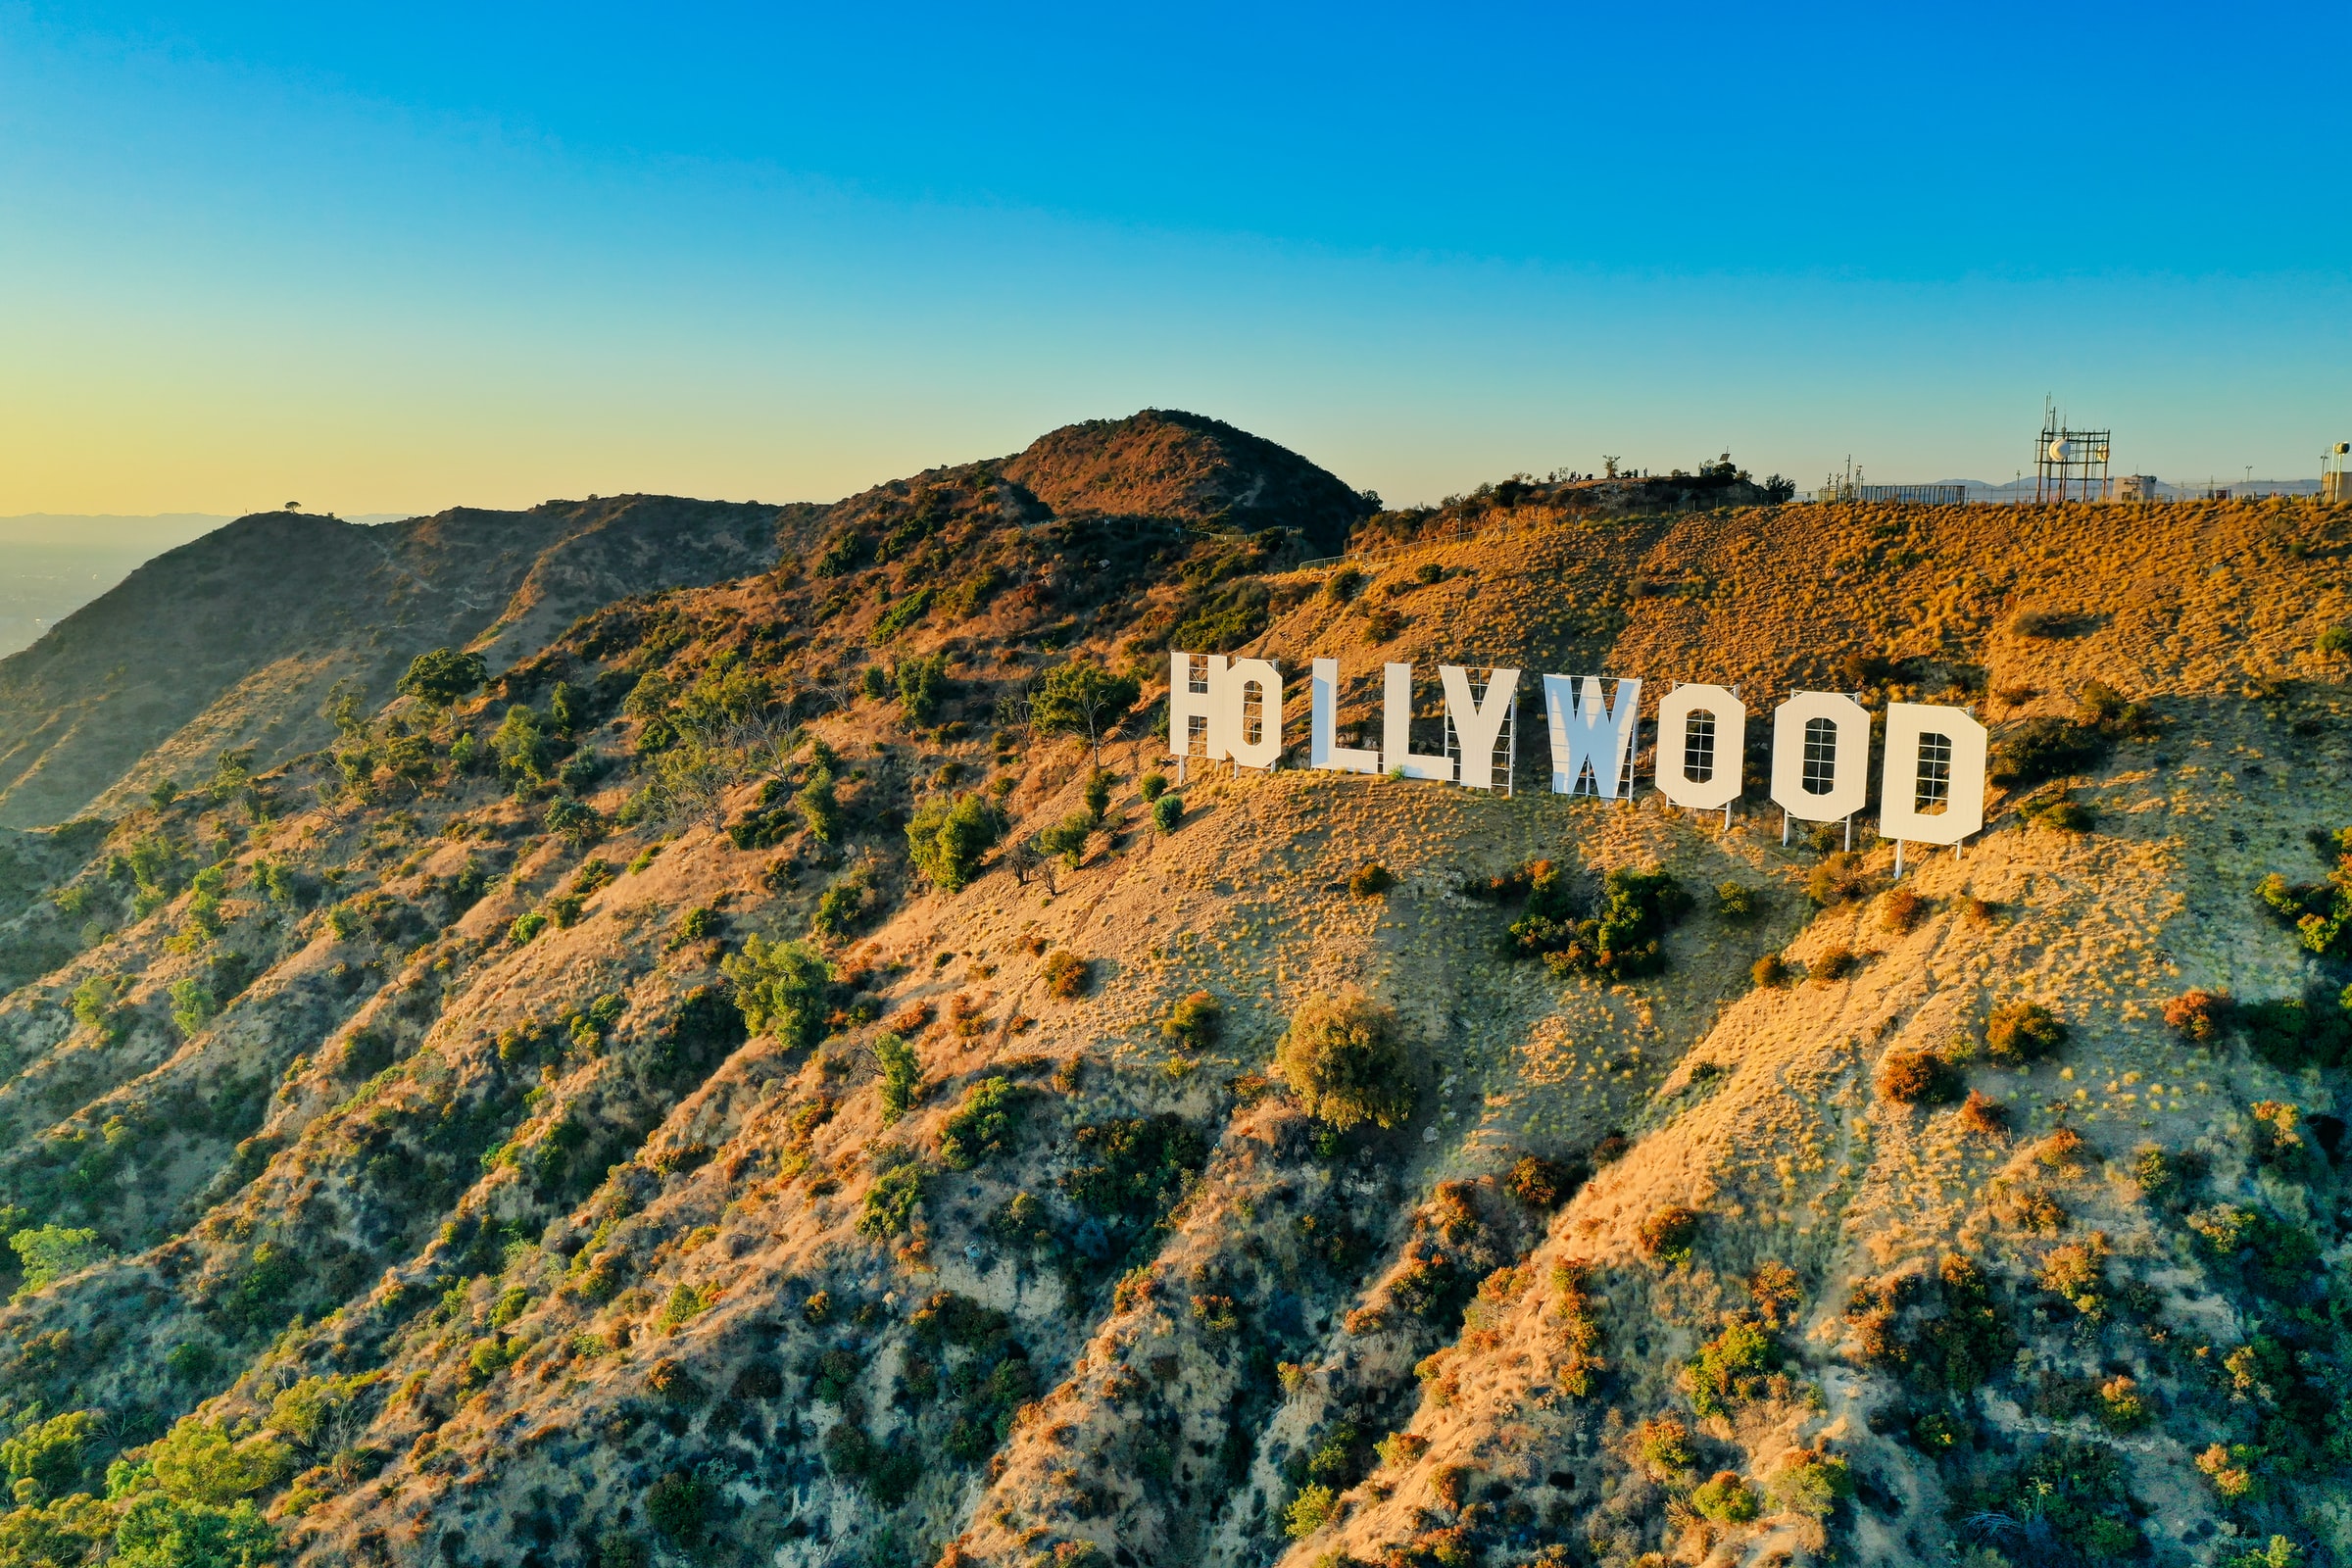 Hollywood sign in Los Angeles. Photo by Venti Views from Unsplash.